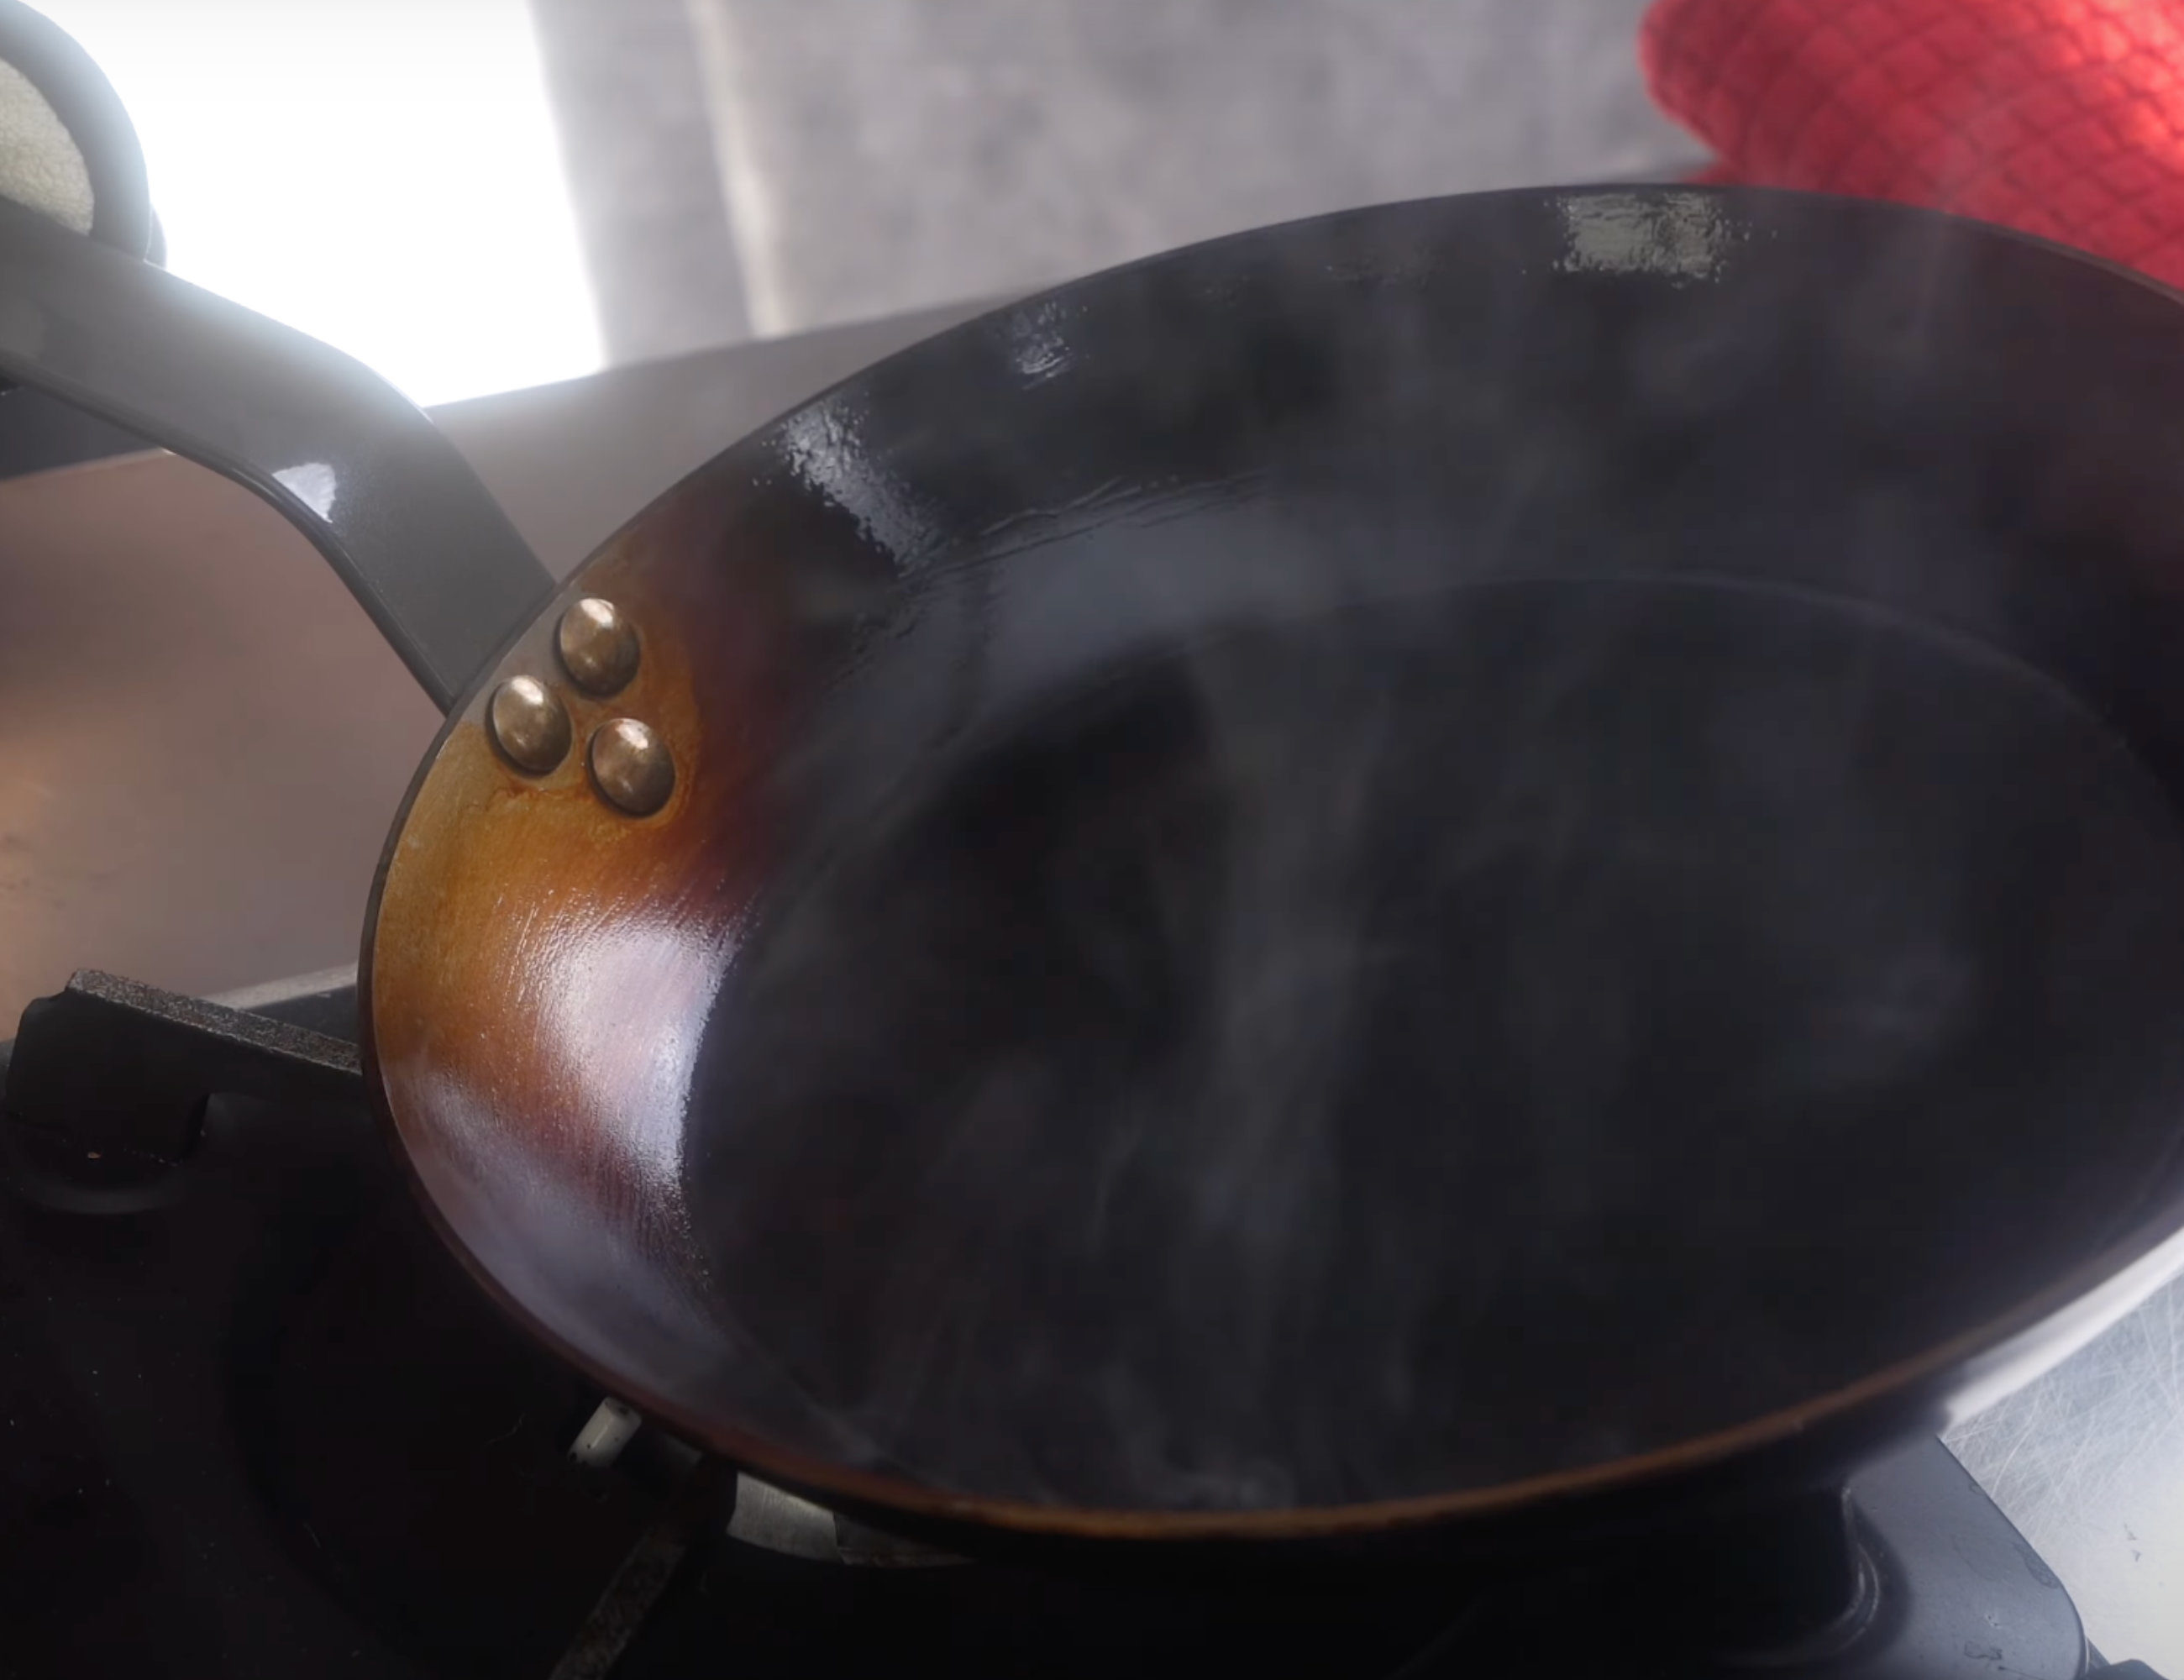 https://www.piattorecipes.com/wp-content/uploads/2022/09/How-to-Season-a-Cast-Iron-Pan-or-Carbon-Steel-Skillet-Finish@2x-2600x2000.jpg